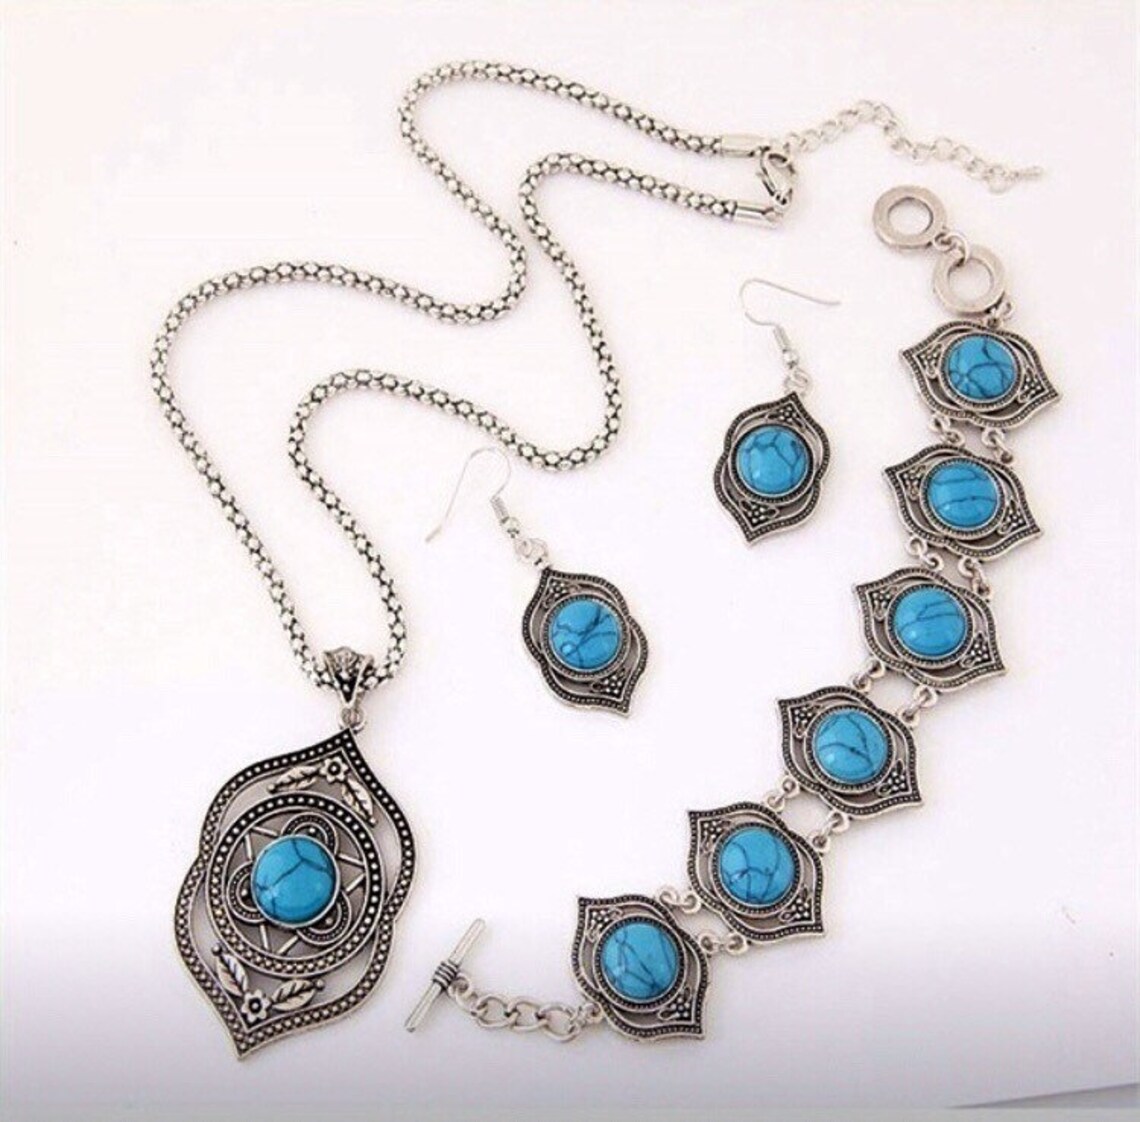 Turquoise & Sterling Silver Jewelry Set by Captivating - Etsy